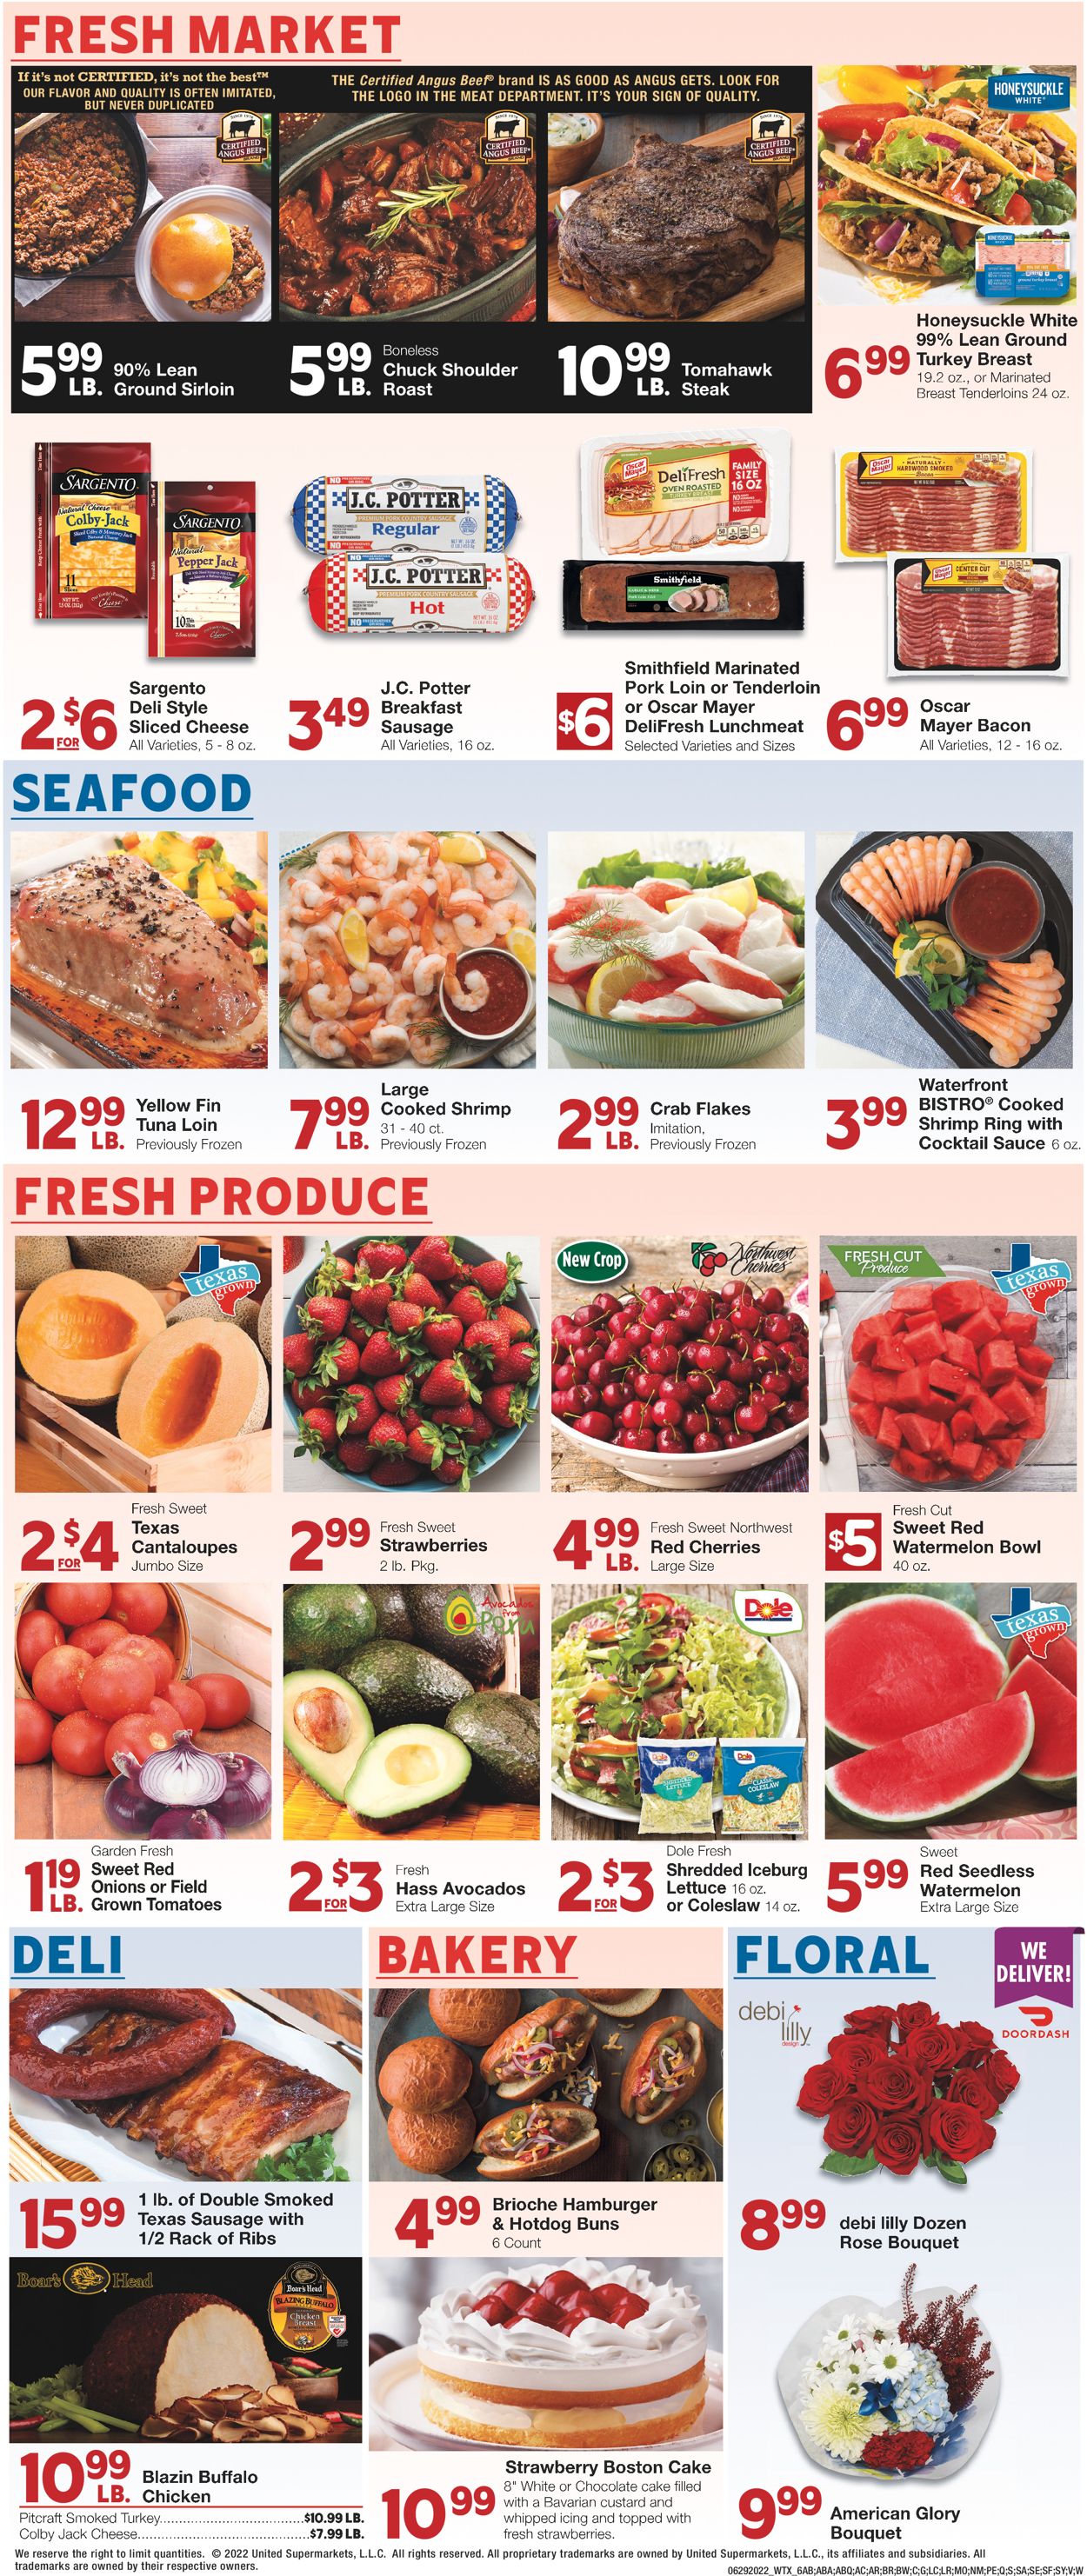 United Supermarkets - 4th of July Sale Weekly Ad Circular - valid 06/29-07/05/2022 (Page 6)